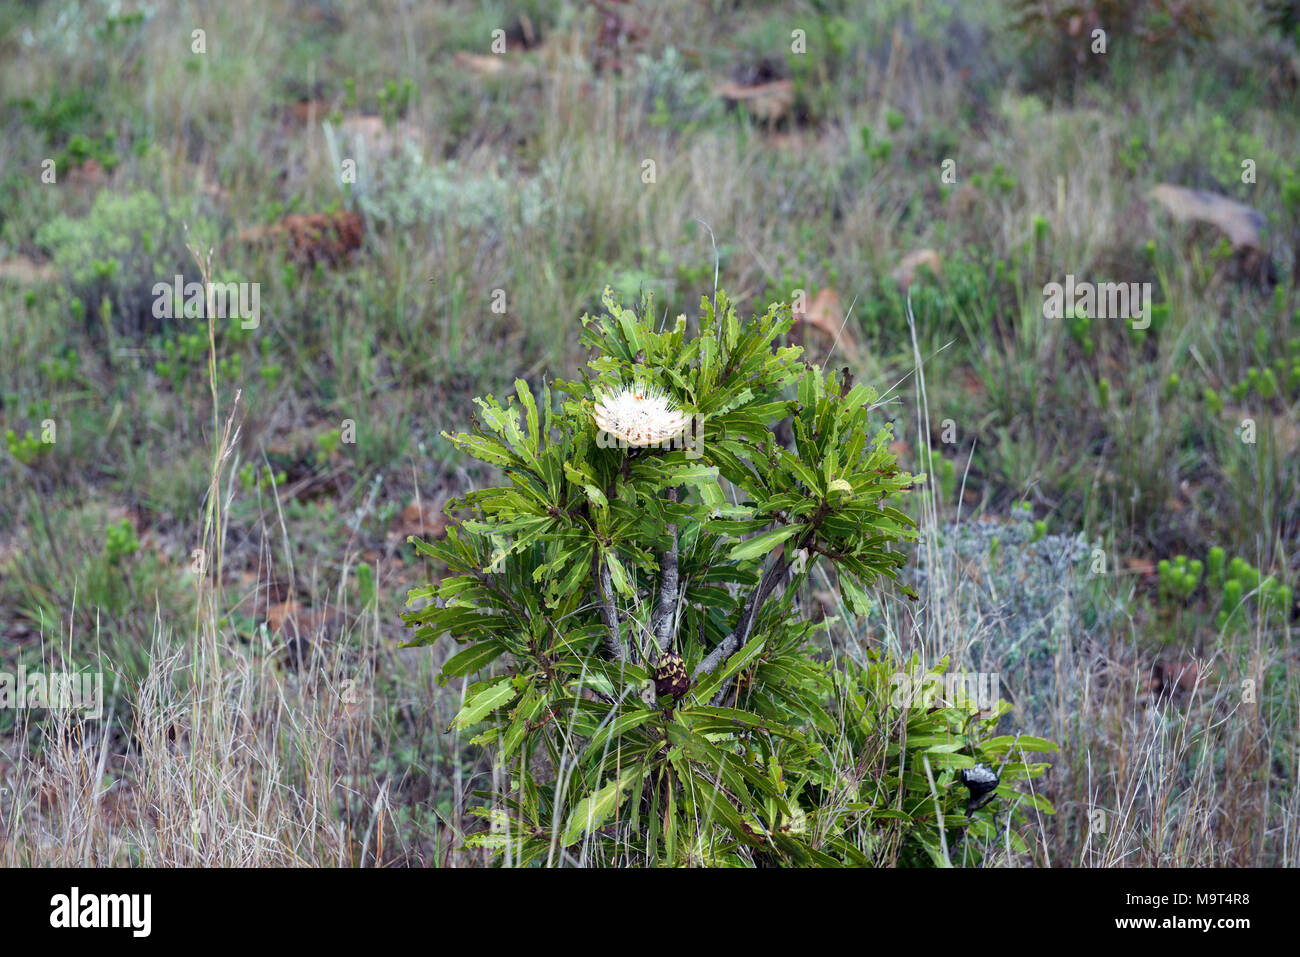 Protea sugarbush suikerbos growing wild in the Kruger National Park, Mpumalanga, South Africa, near to the Mozambique border Stock Photo